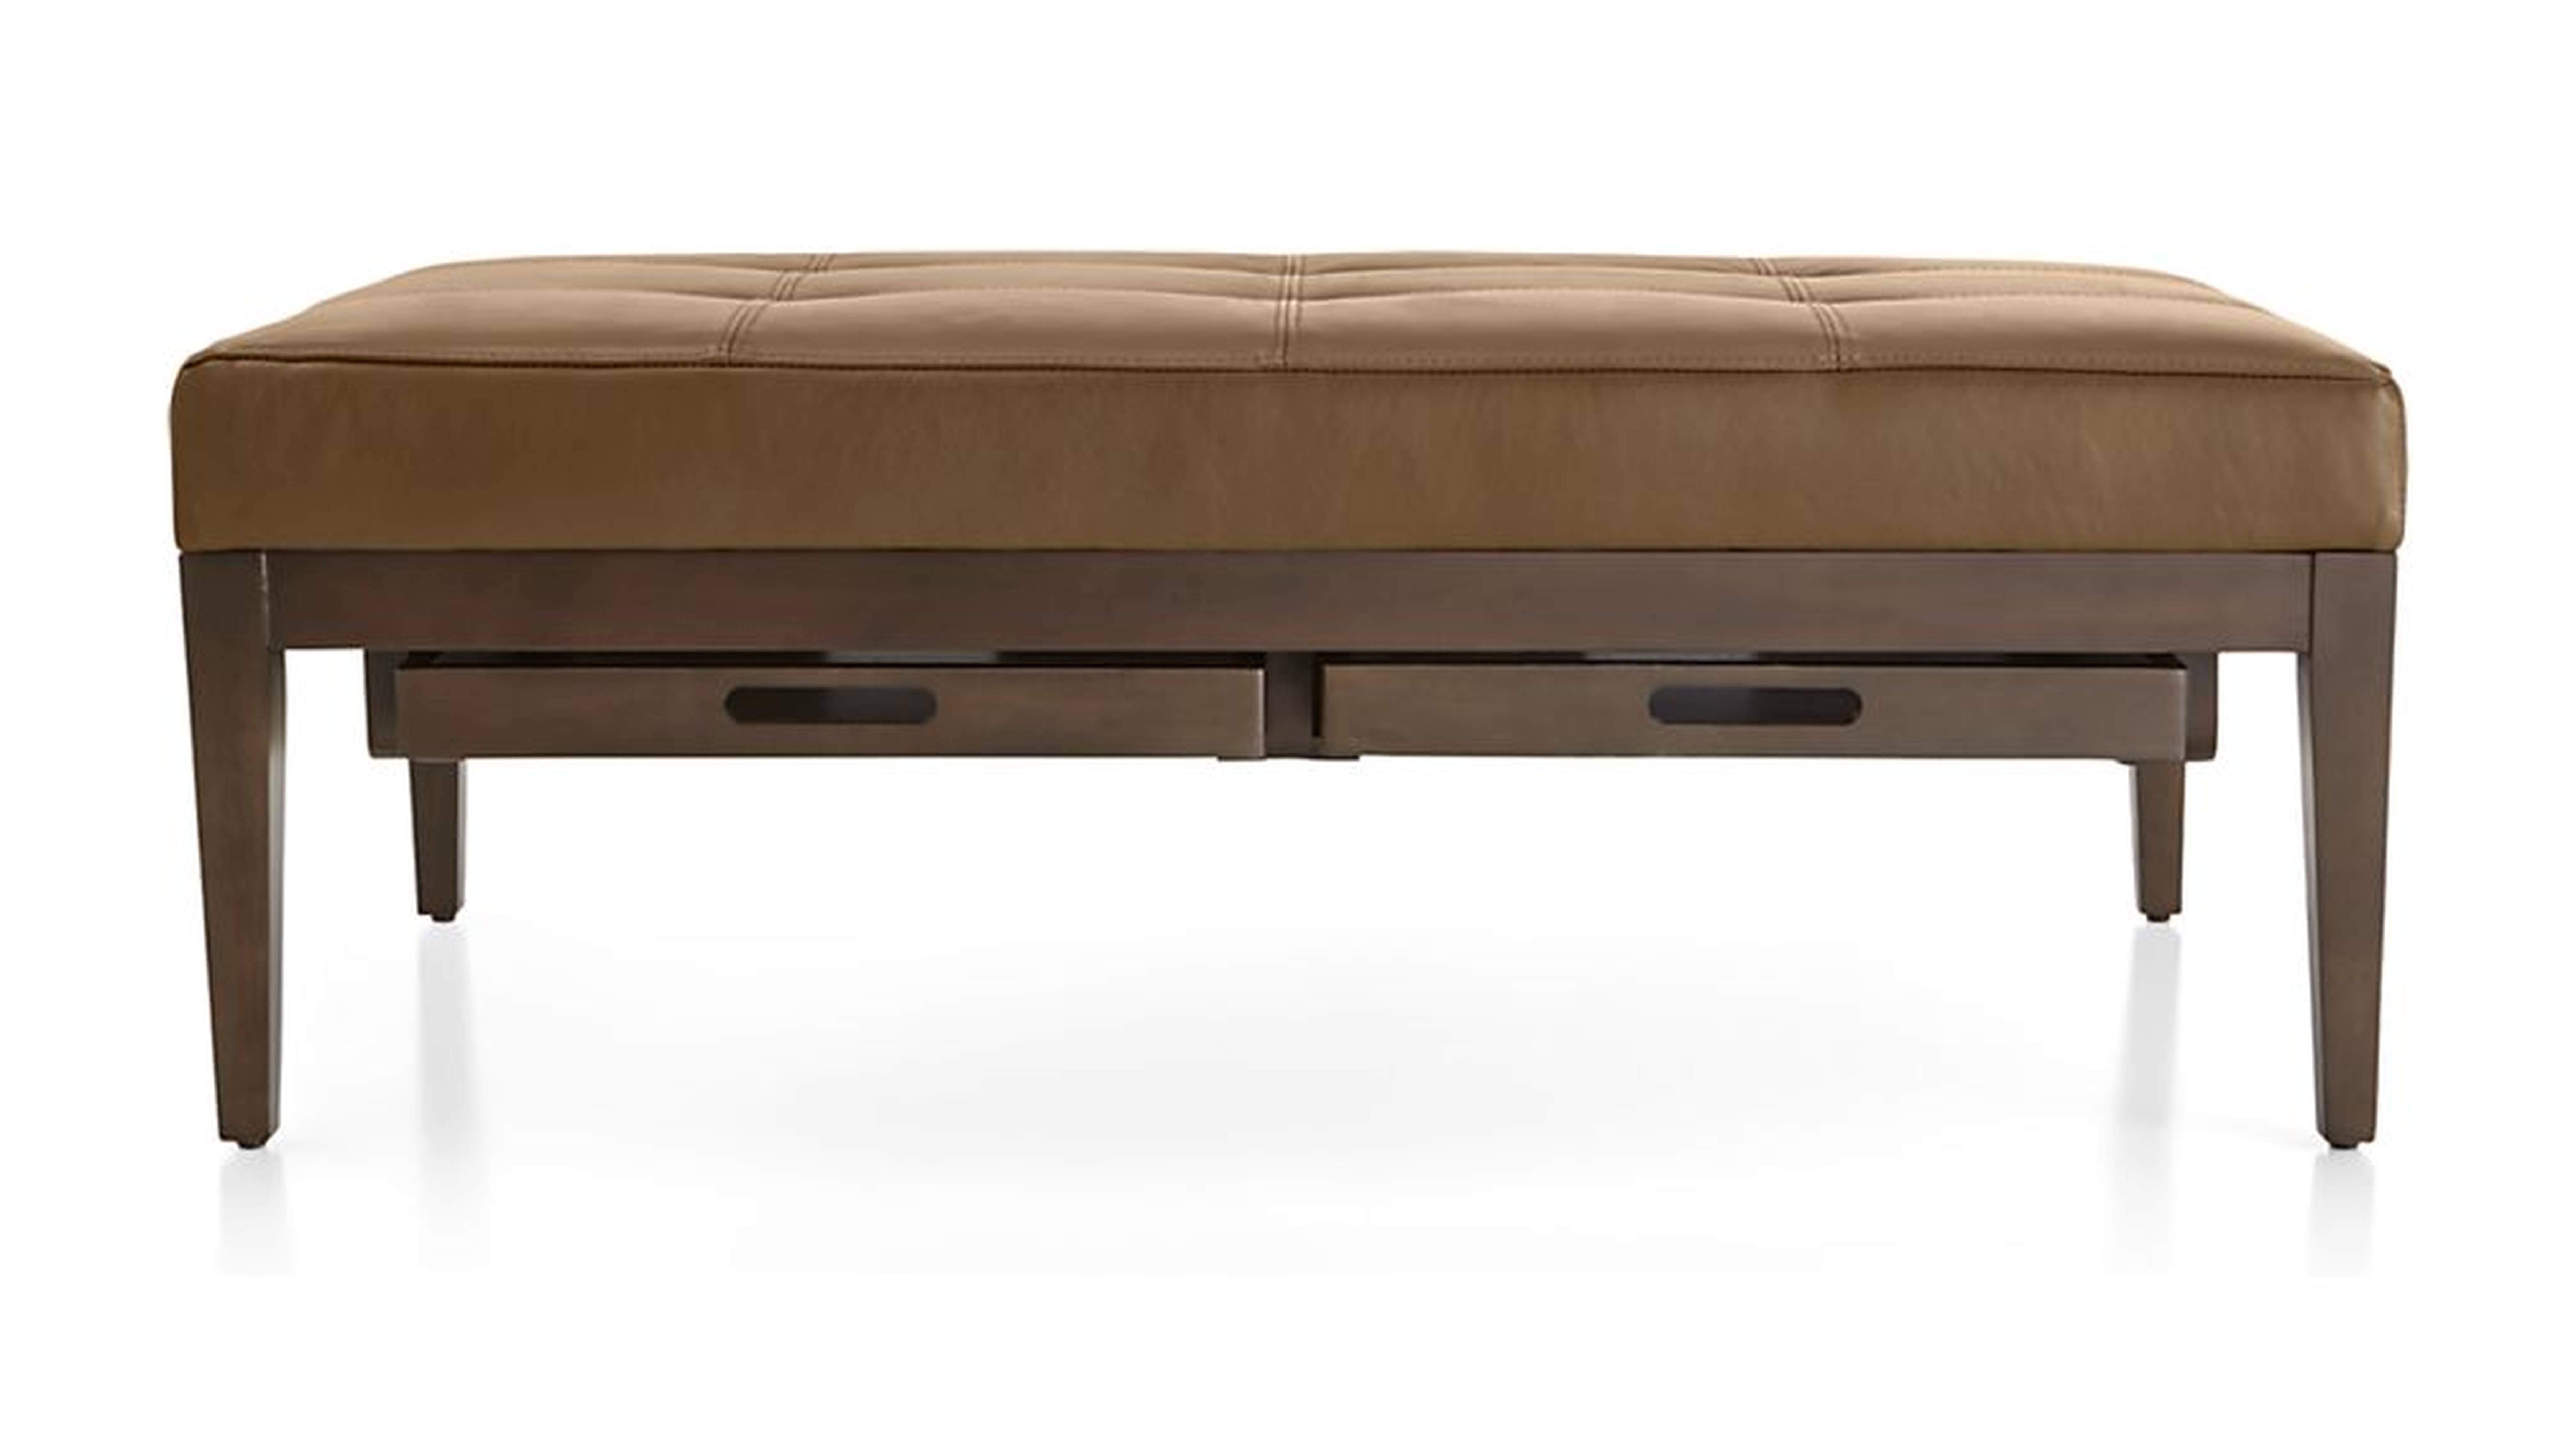 Nash Leather Tufted Rectangular Ottoman with Tray - Crate and Barrel